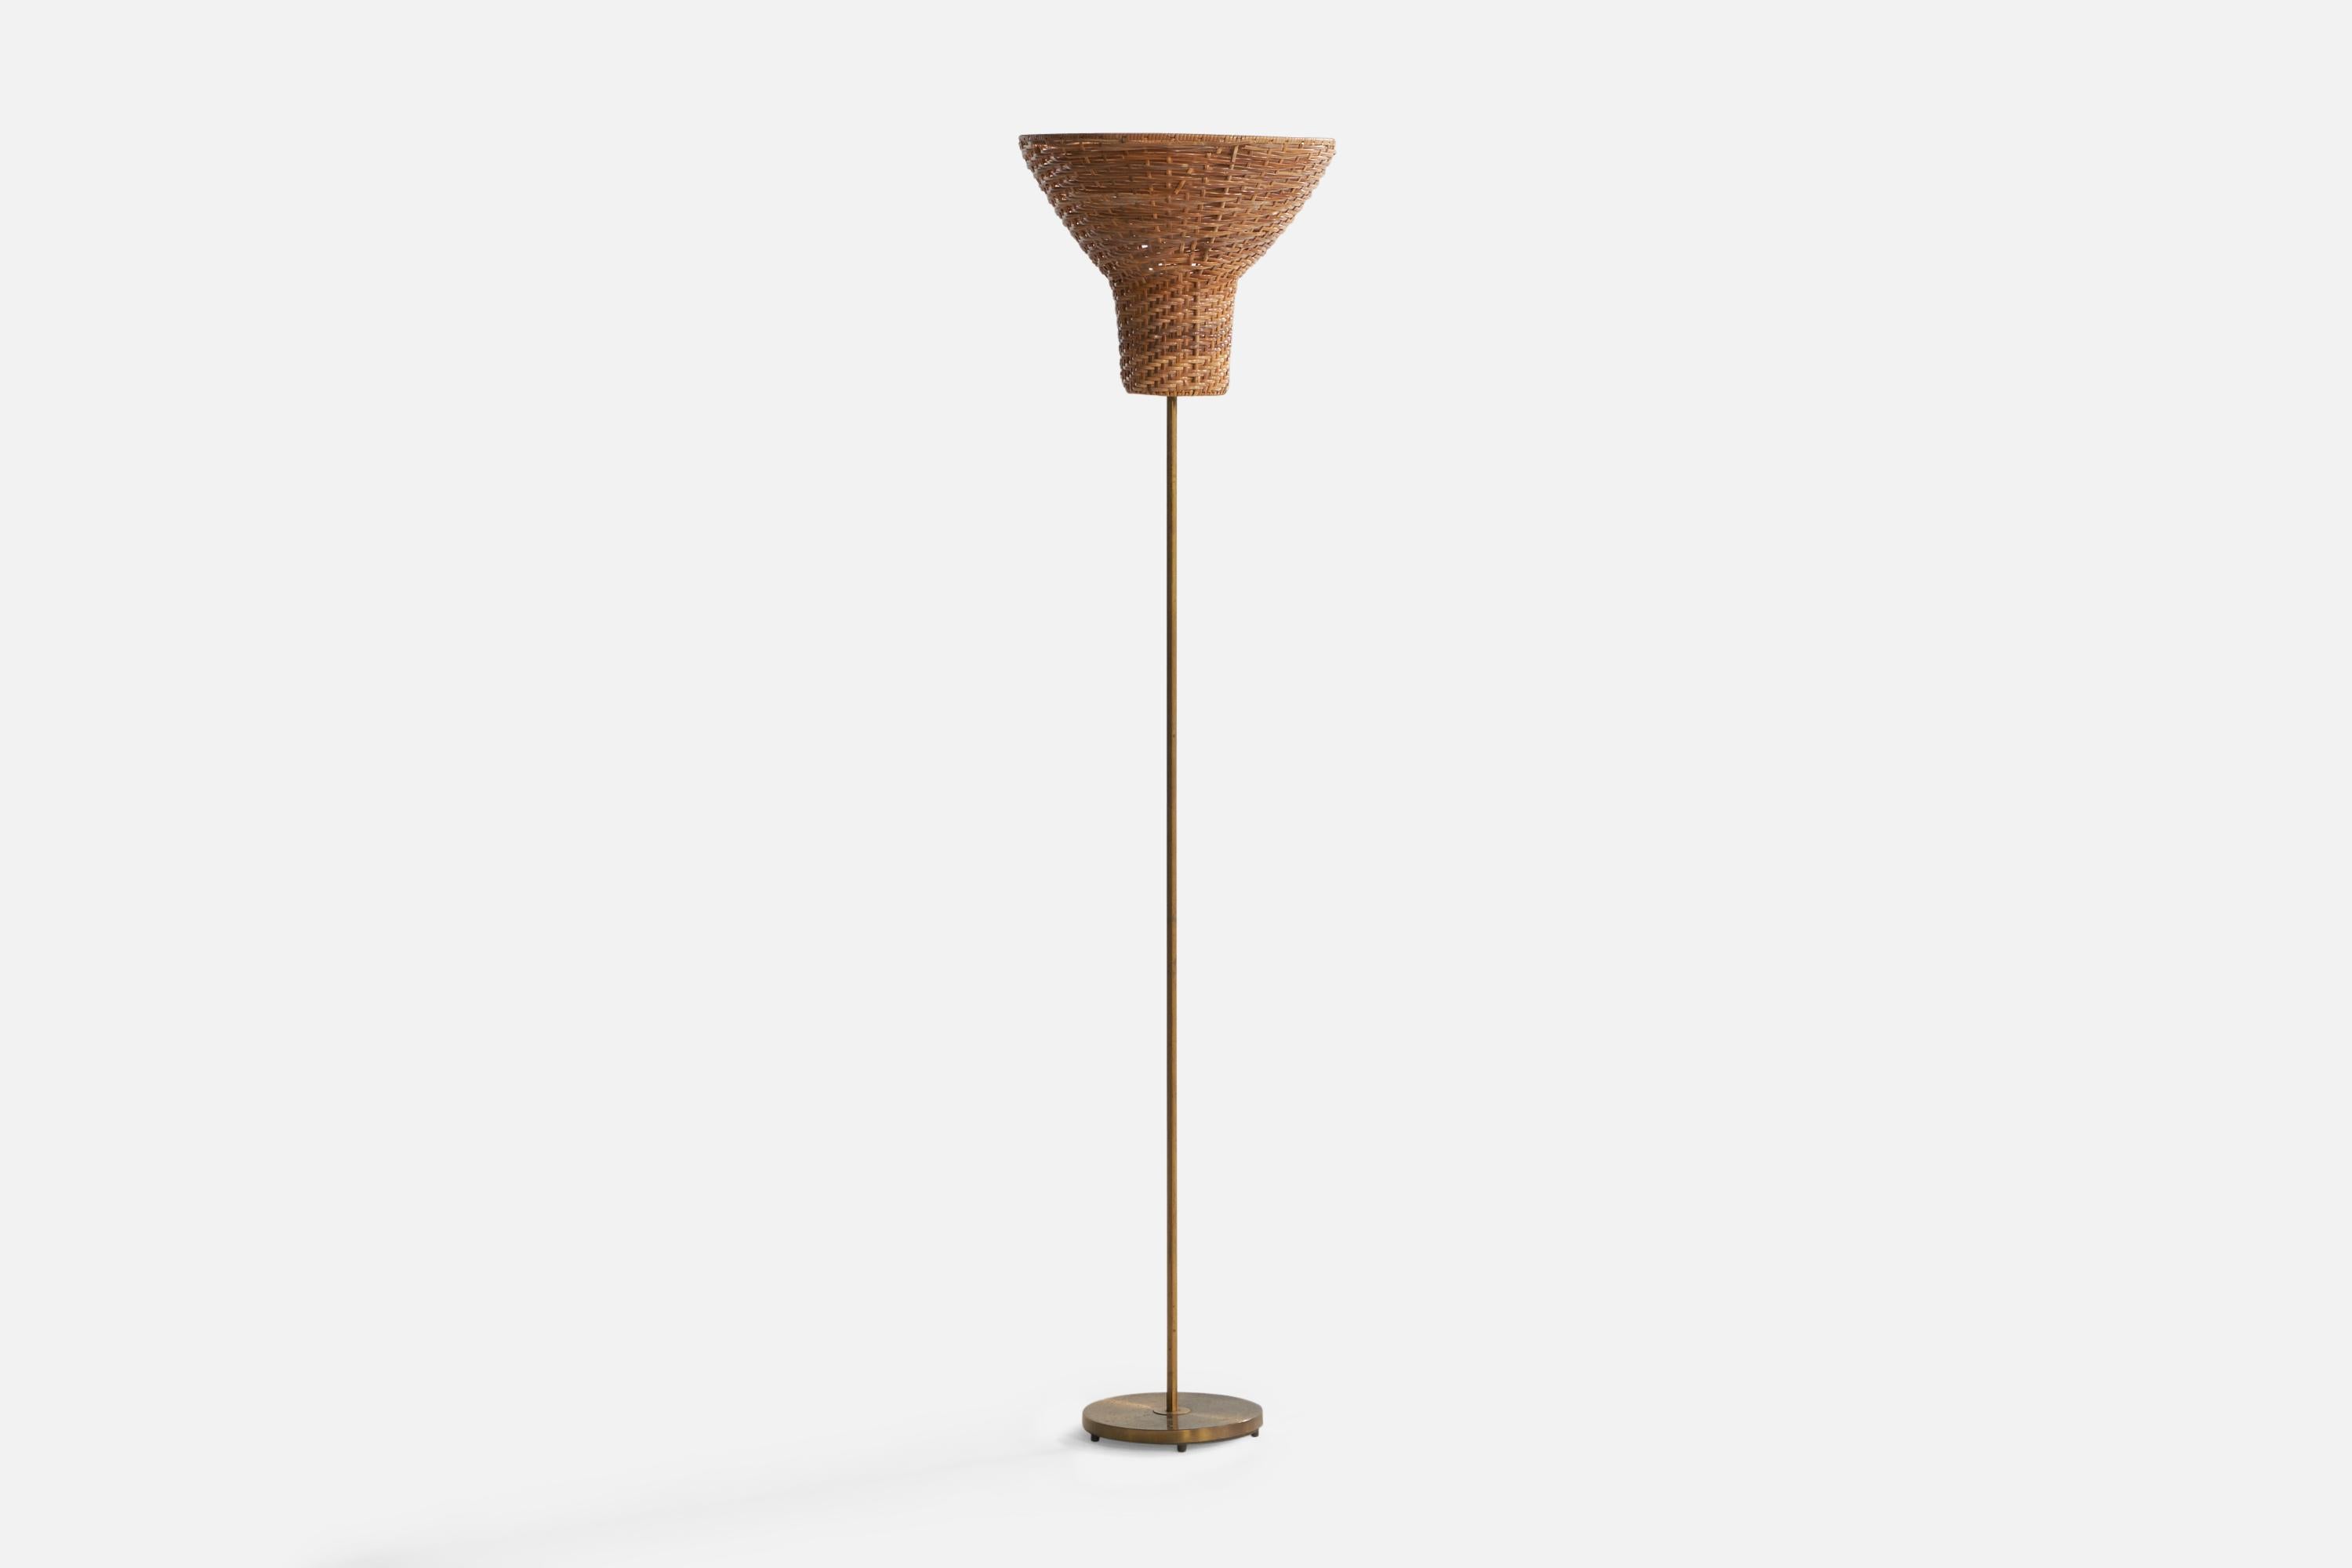 A brass and rattan floor lamp designed and produced in Sweden, c. 1950s.

Overall Dimensions (inches): 56.8” H x 13.55” Diameter. Stated dimensions include shade.
Bulb Specifications: E-26 Bulb
Number of Sockets: 1
All lighting will be converted for